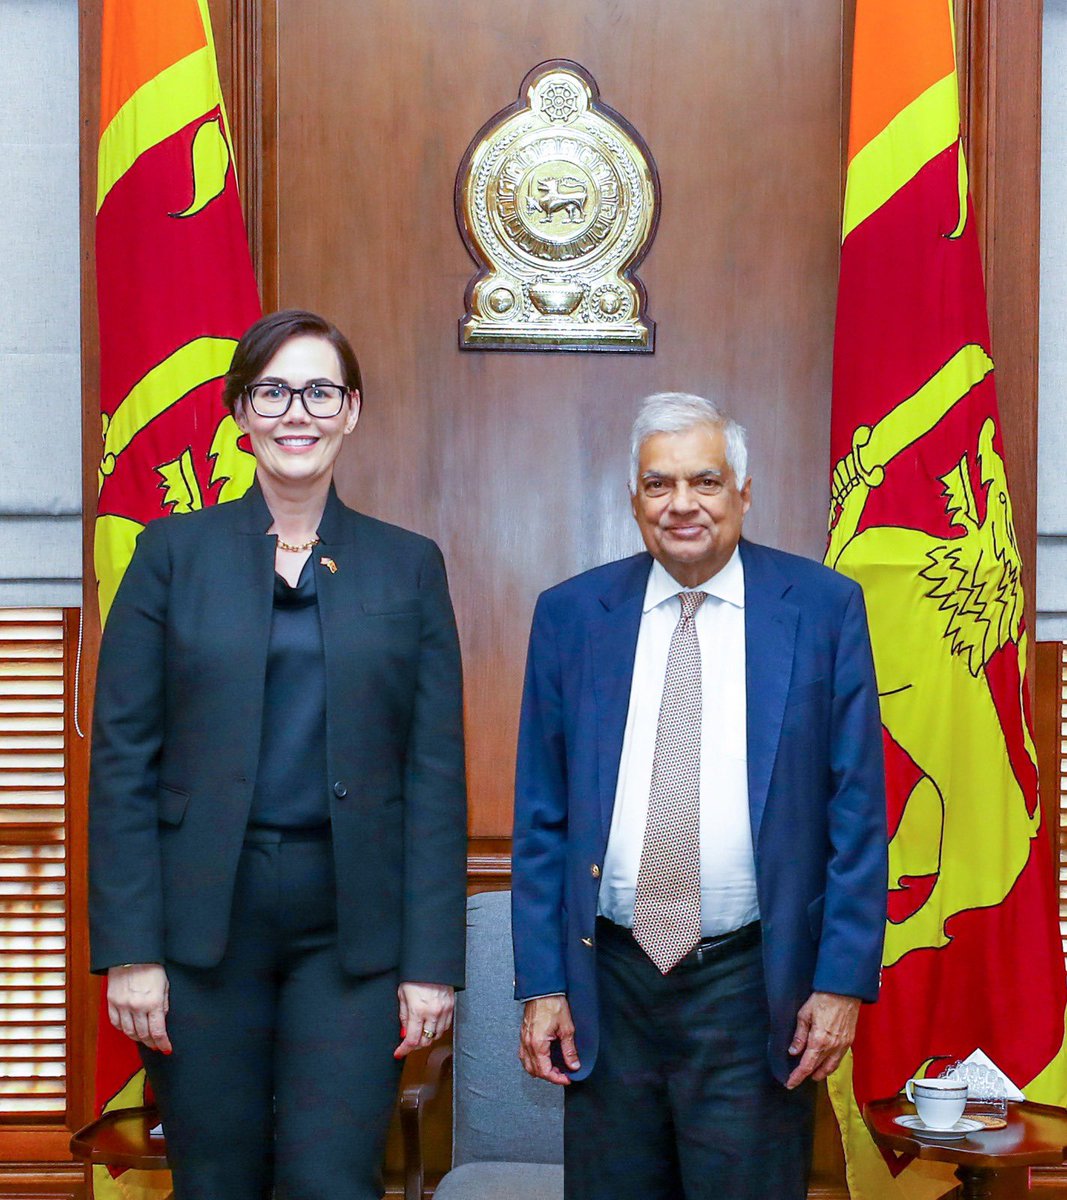 In our meeting with President @RW_UNP, @USDA Under Secretary Taylor and I highlighted the almost decade-long partnership on food security between the U.S., Save the Children Sri Lanka @SCISL, and the government of Sri Lanka to provide nutritious meals to children through U.S.